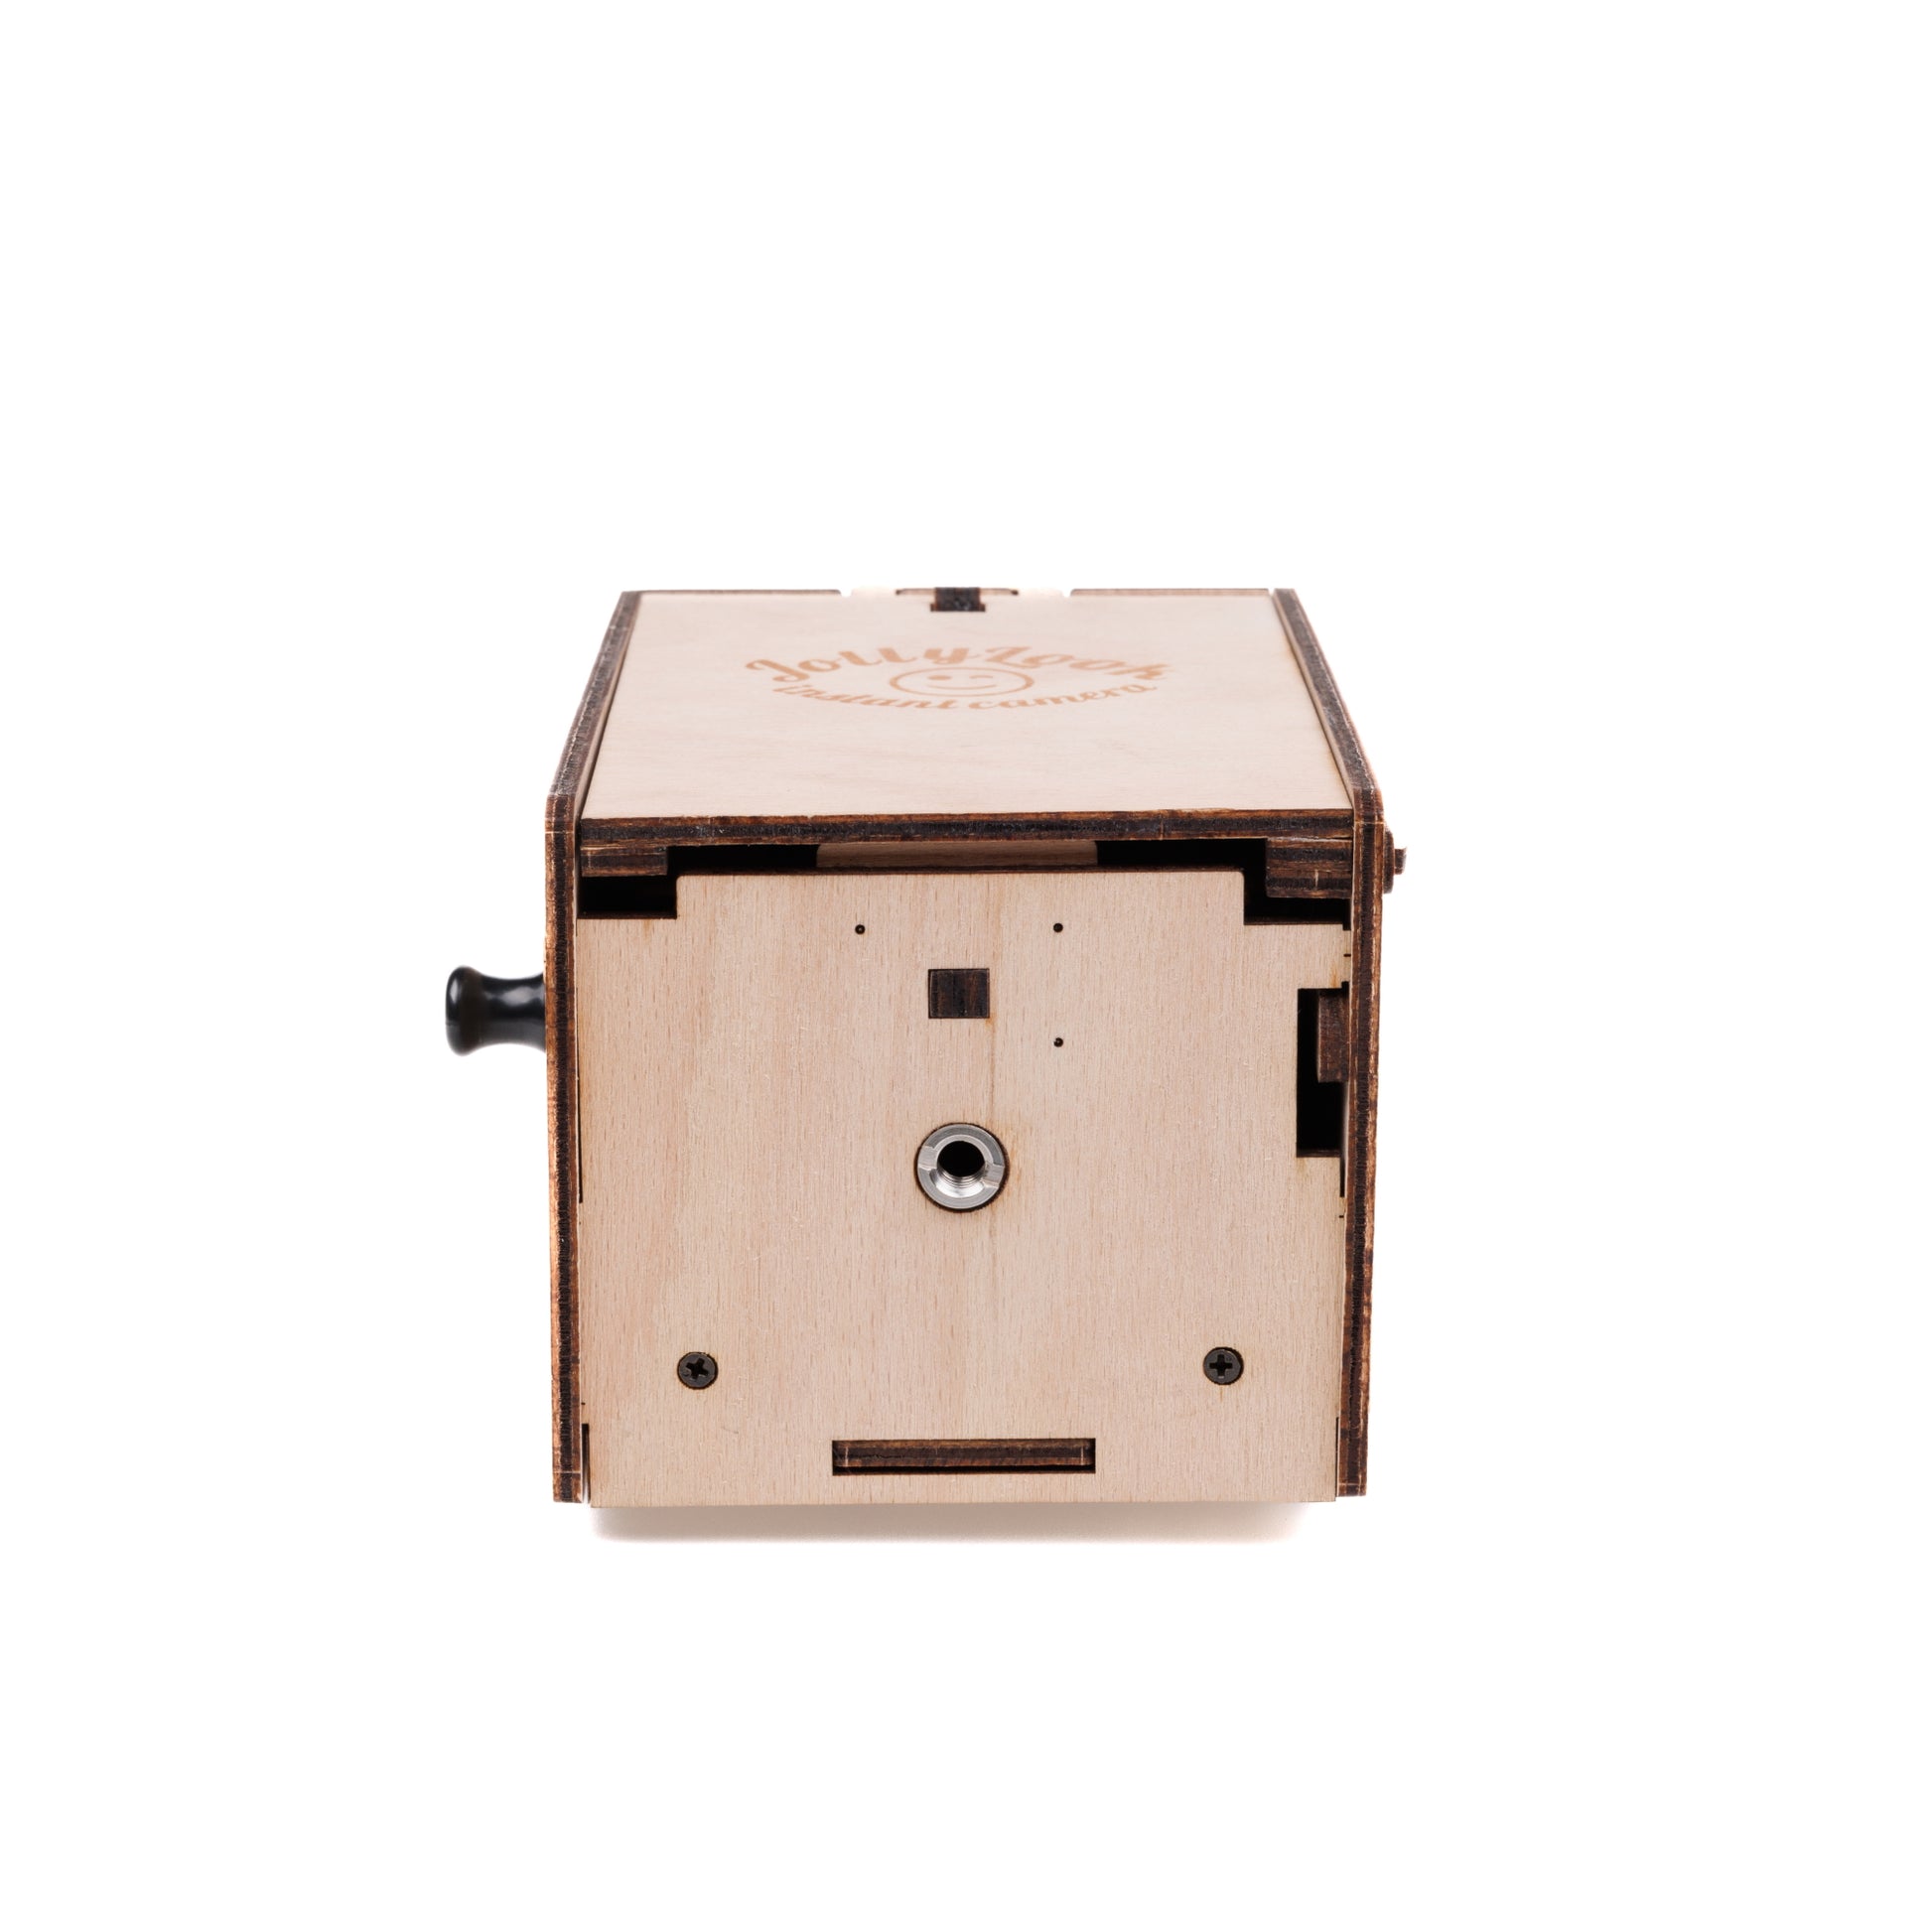 Folded Pre-assembled Pinhole Instant Mini Film Camera in Natural wood against white background